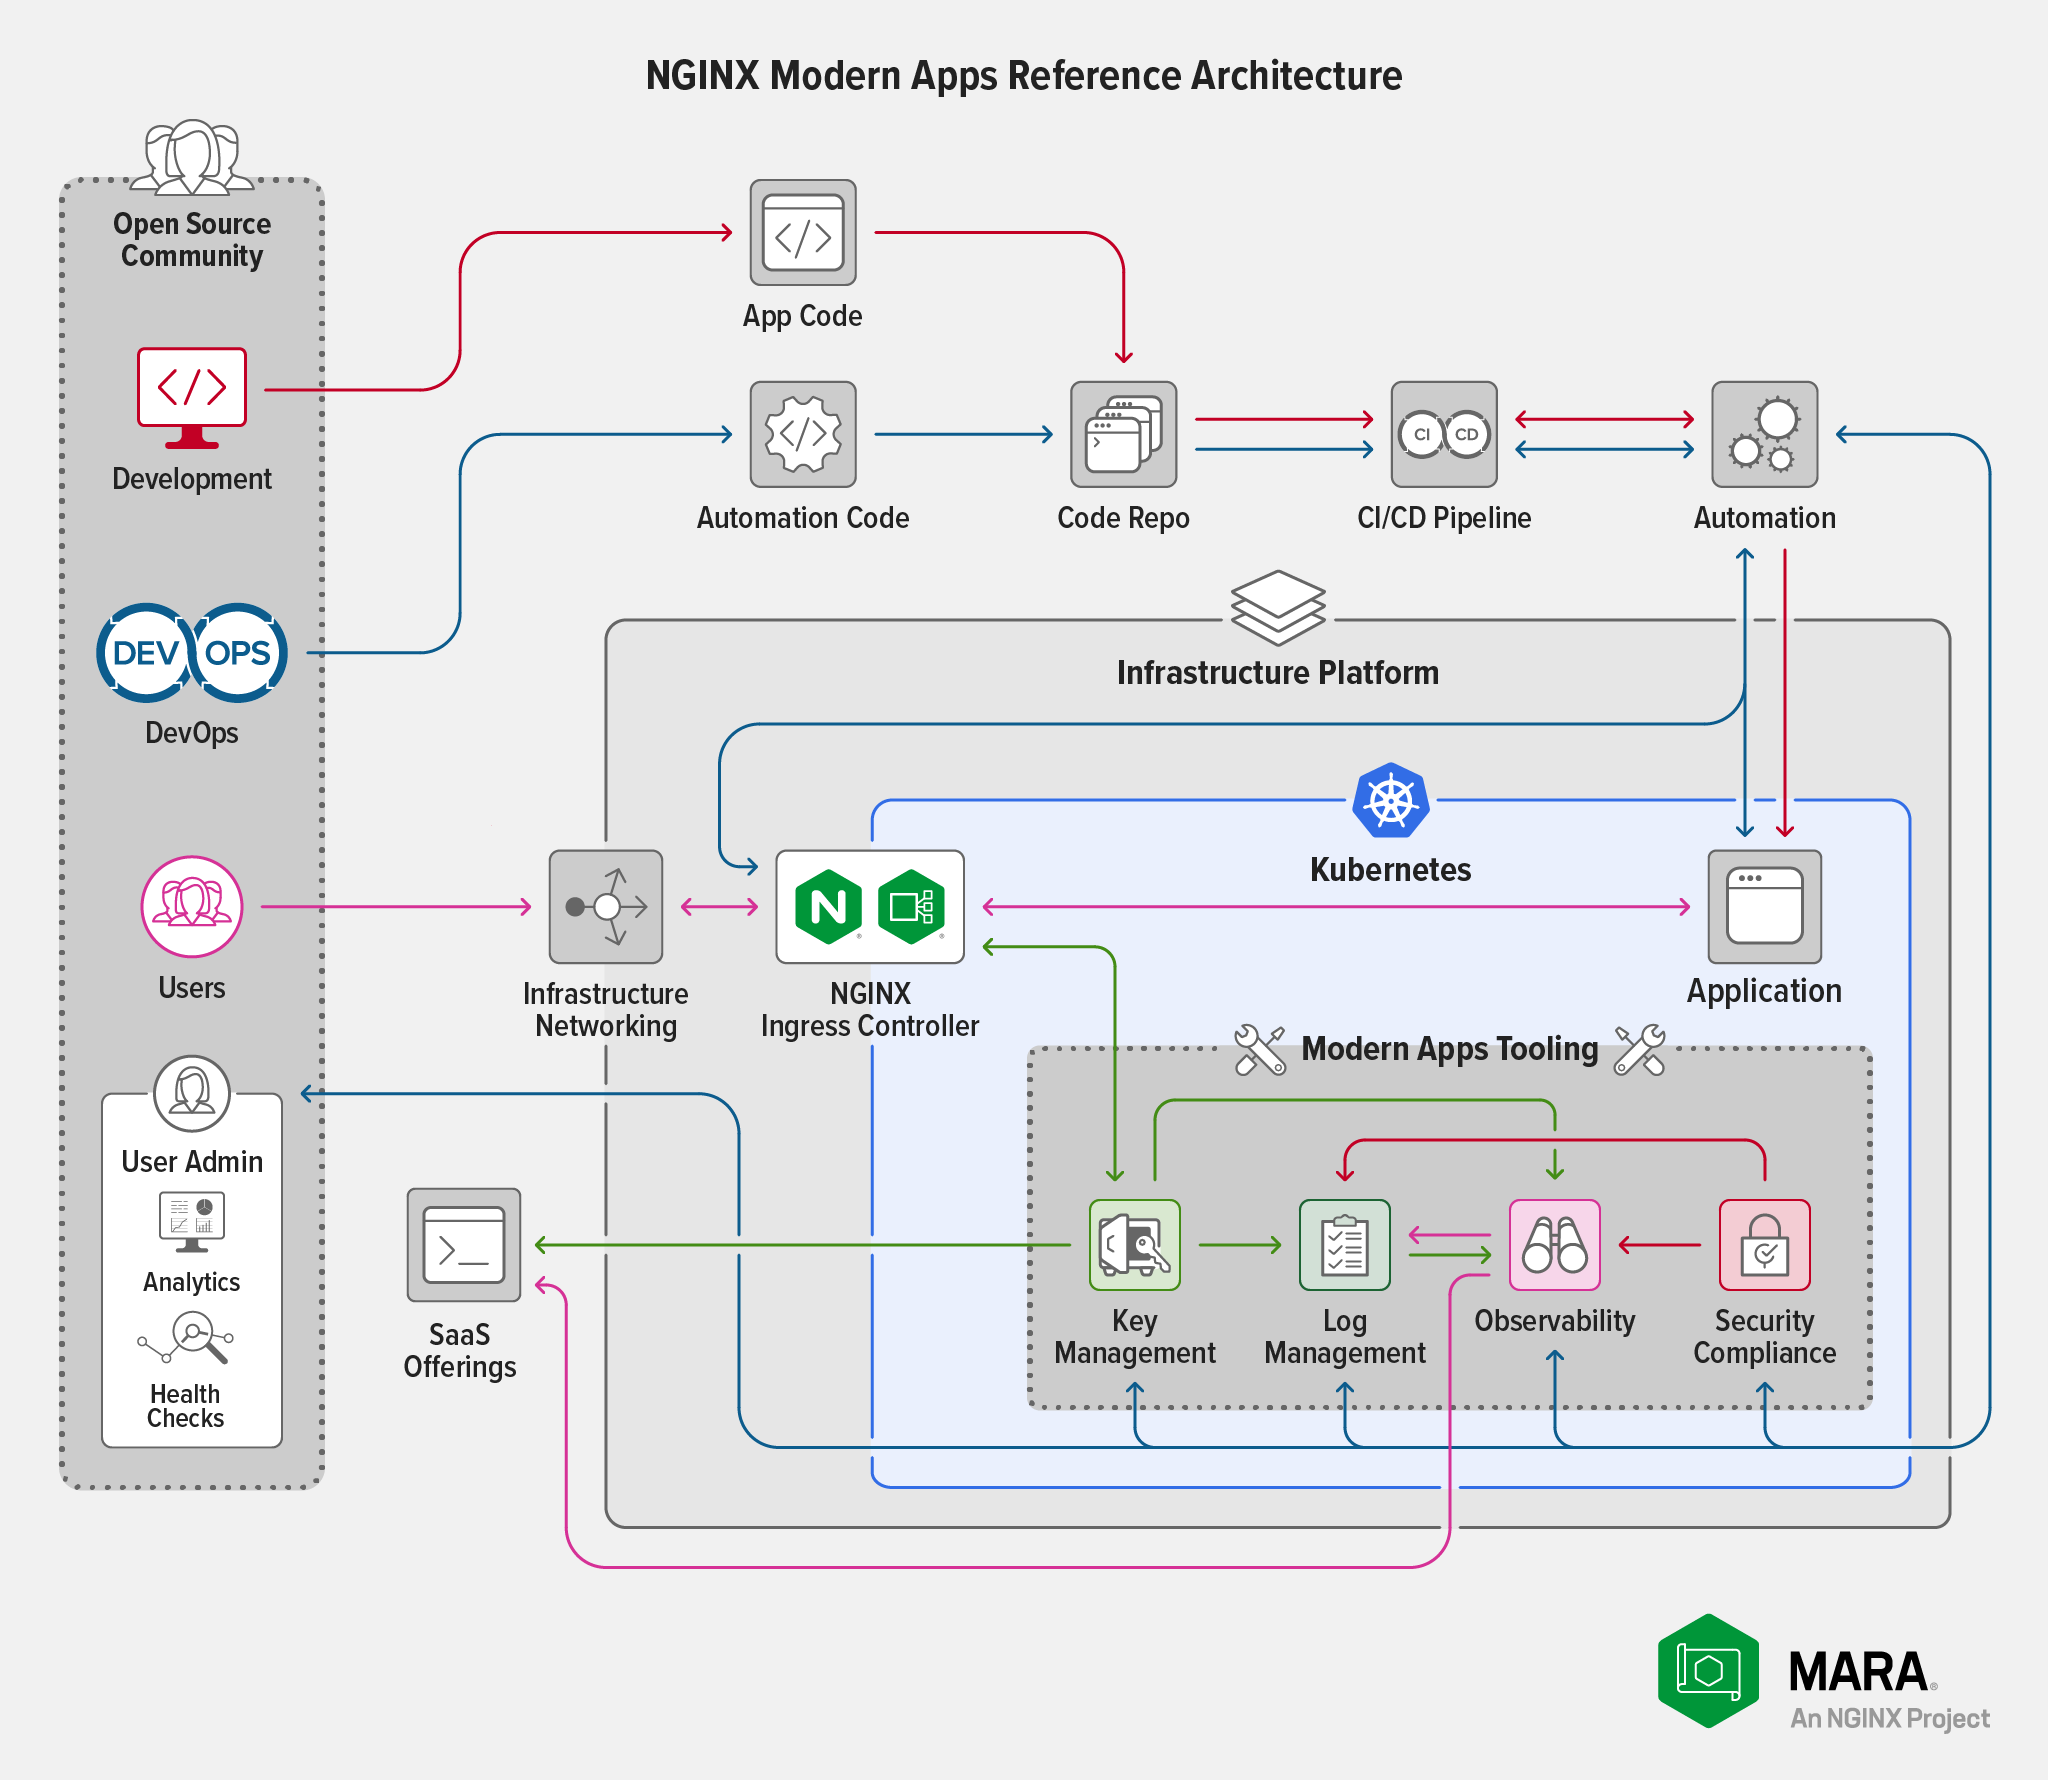 Diagram showing topology of the NGINX Modern Apps Reference Architecture